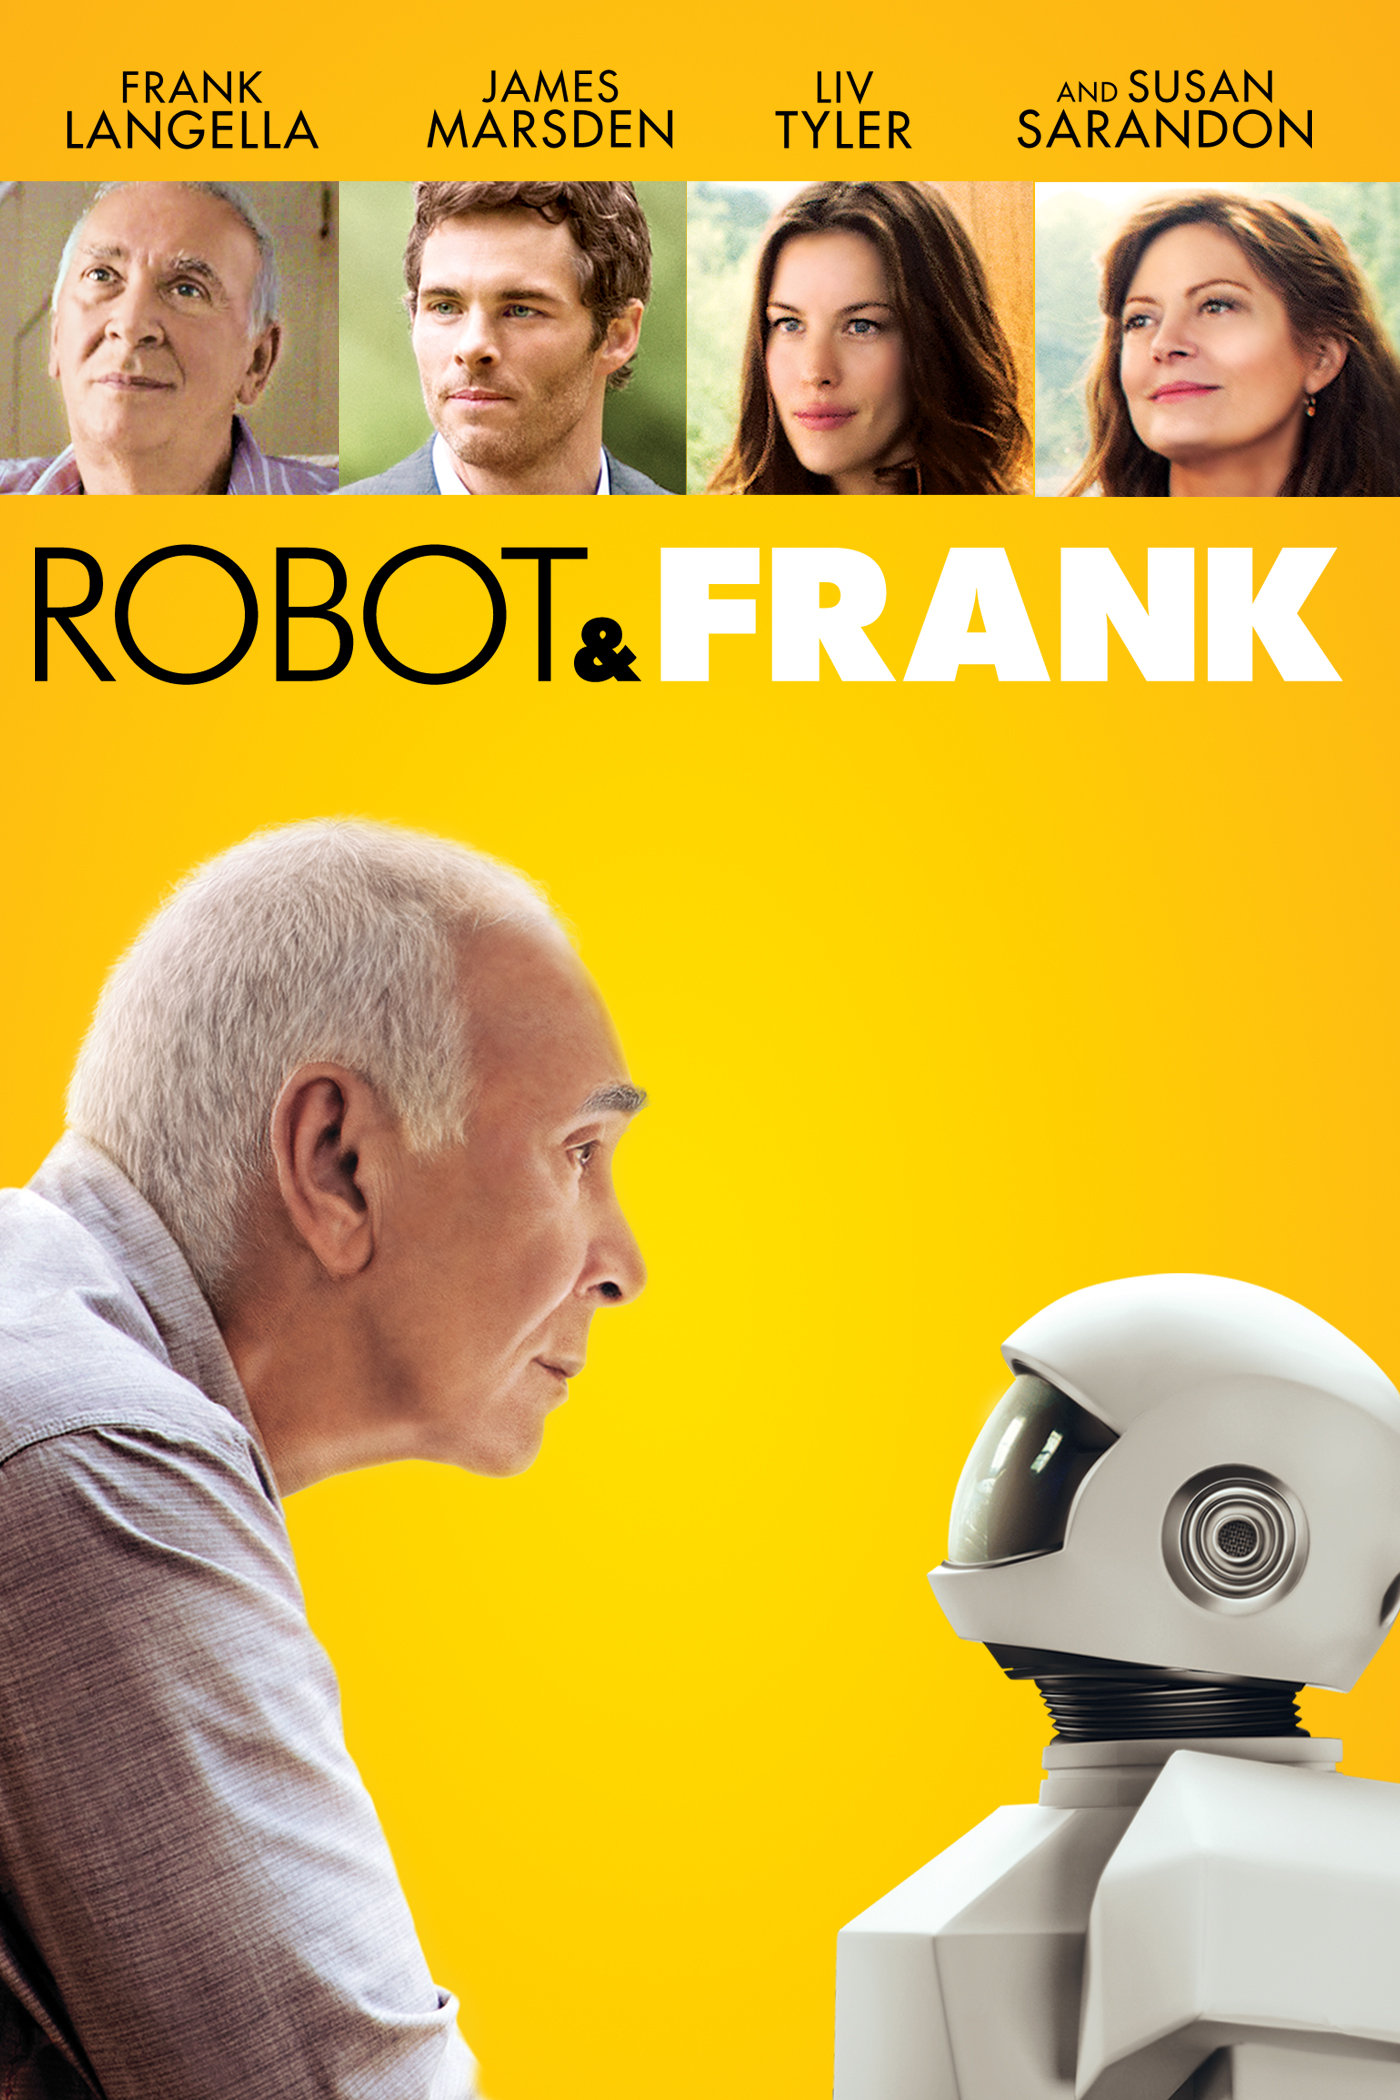 [One Day University Film School Presents: "Robot and Frank" and a Discussion with Roger Berkowitz] 